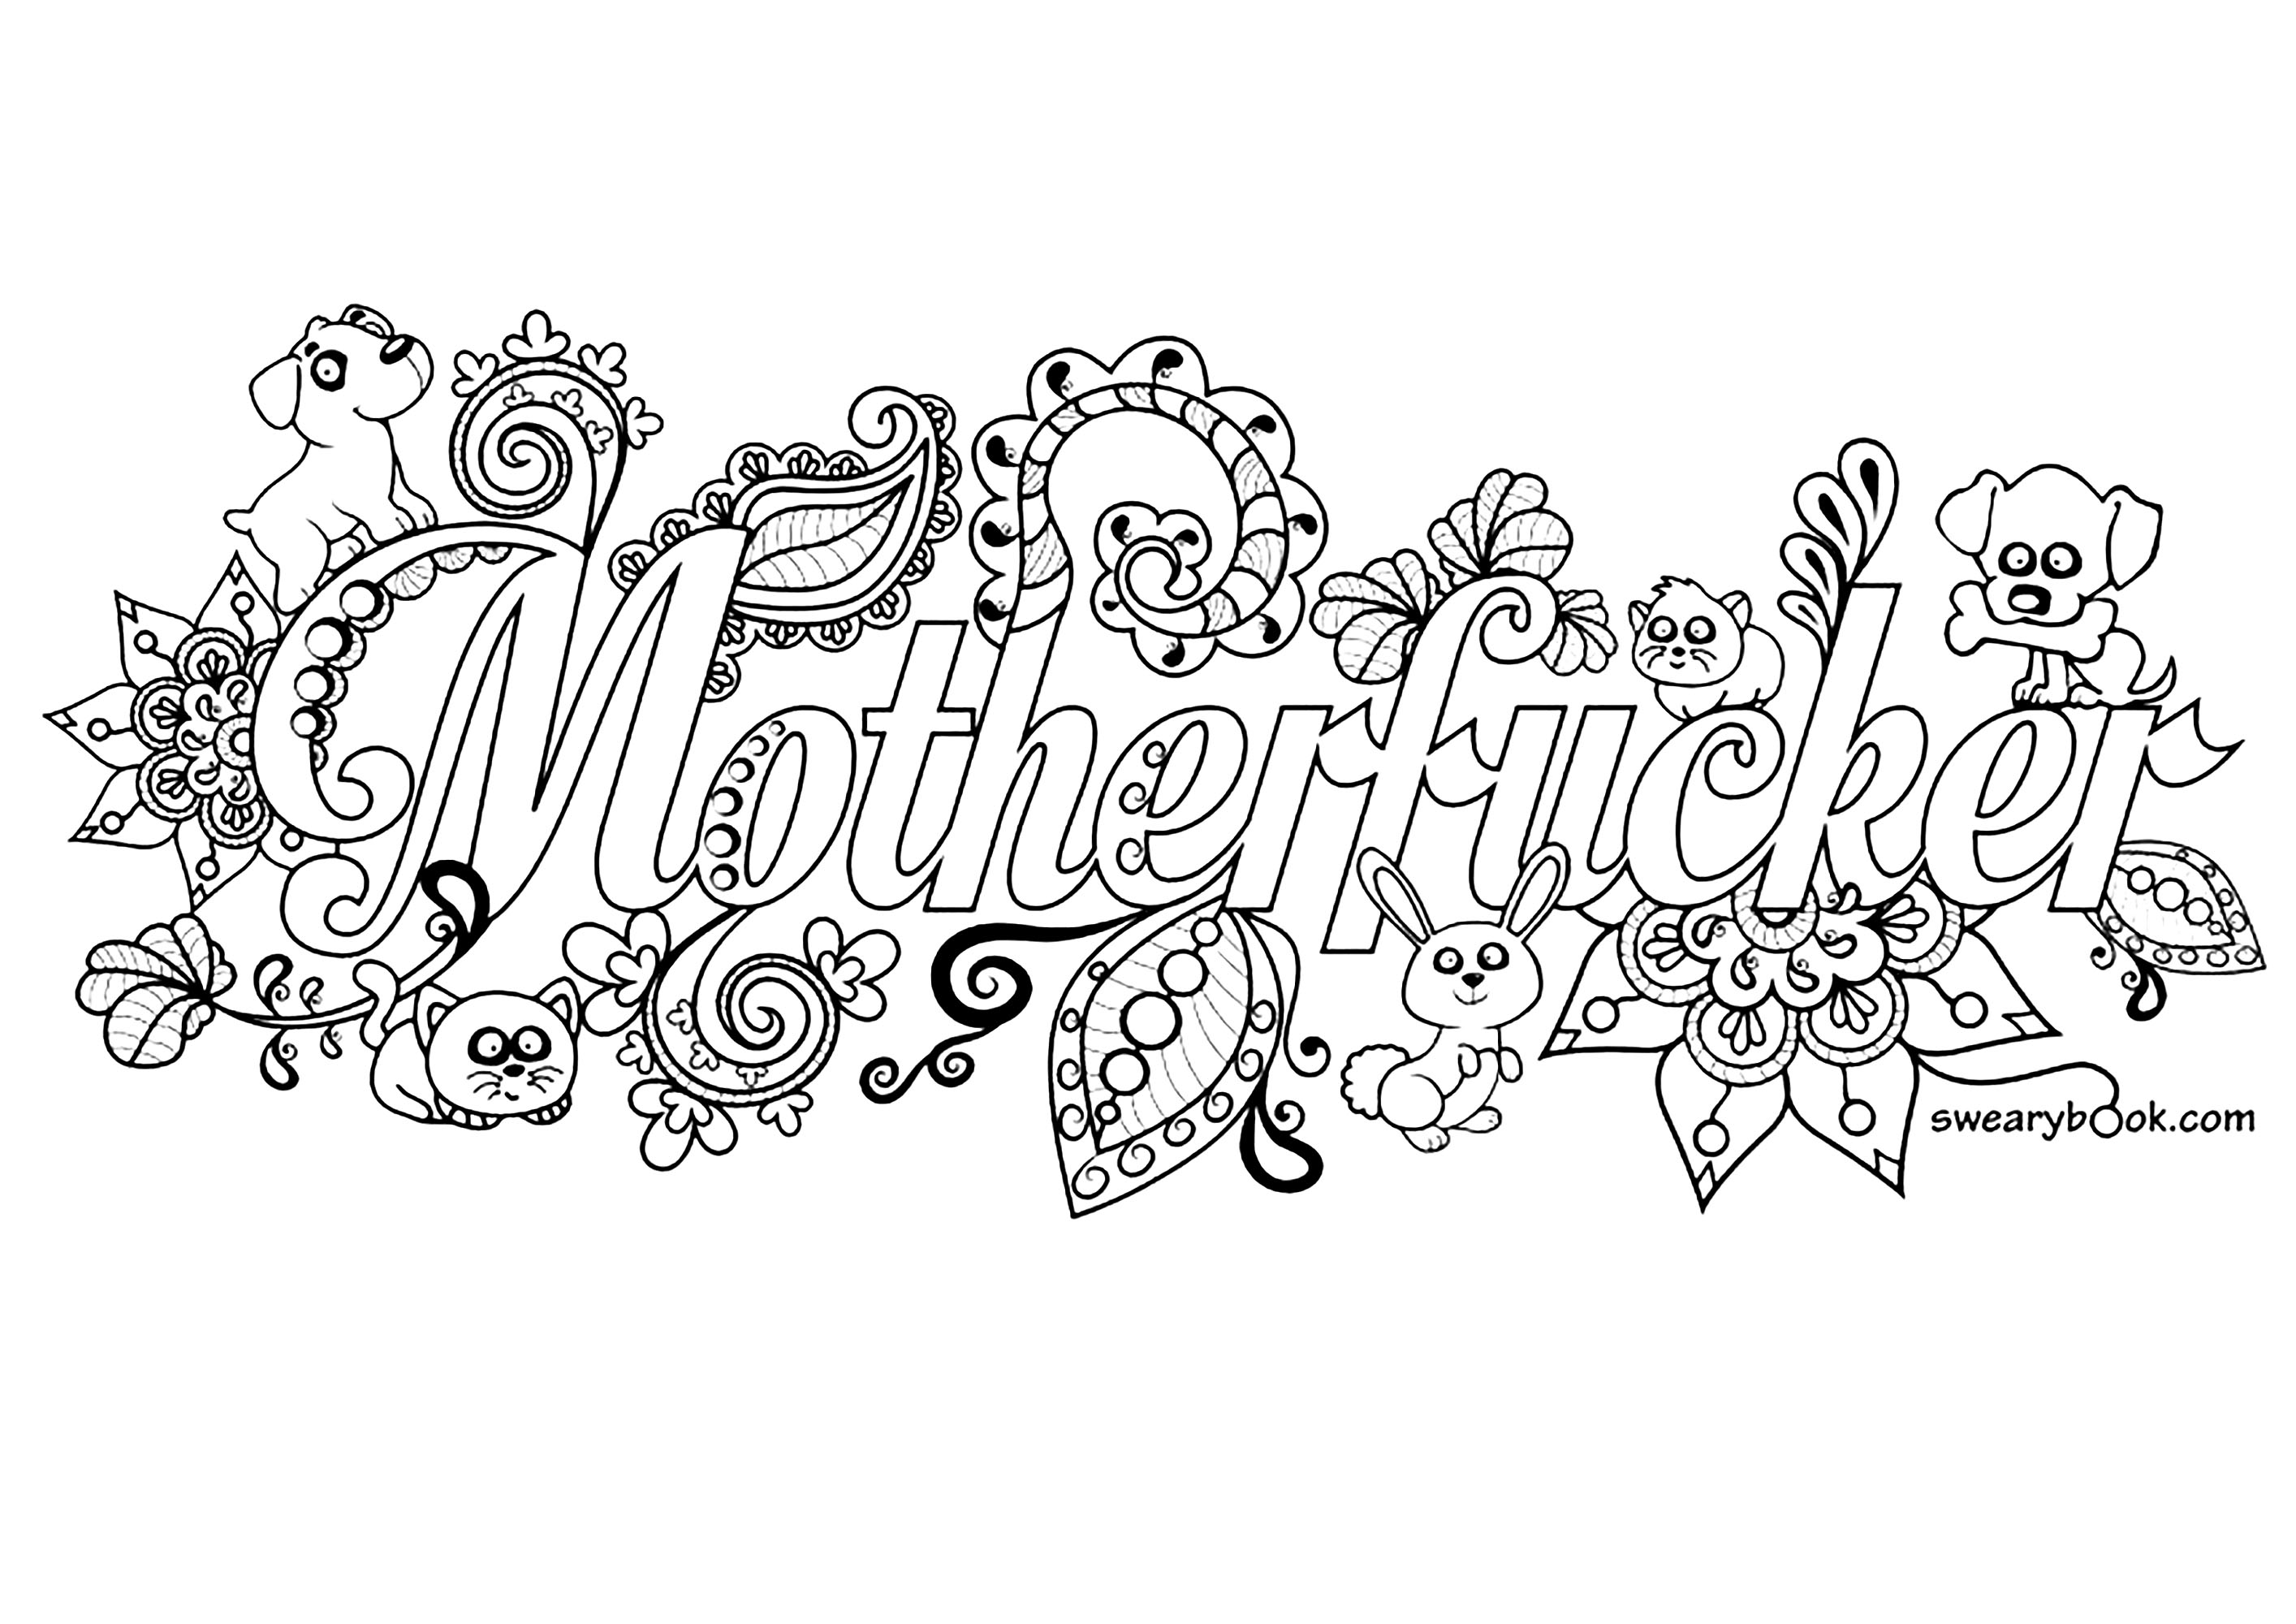 Motherfucker swear word coloring page